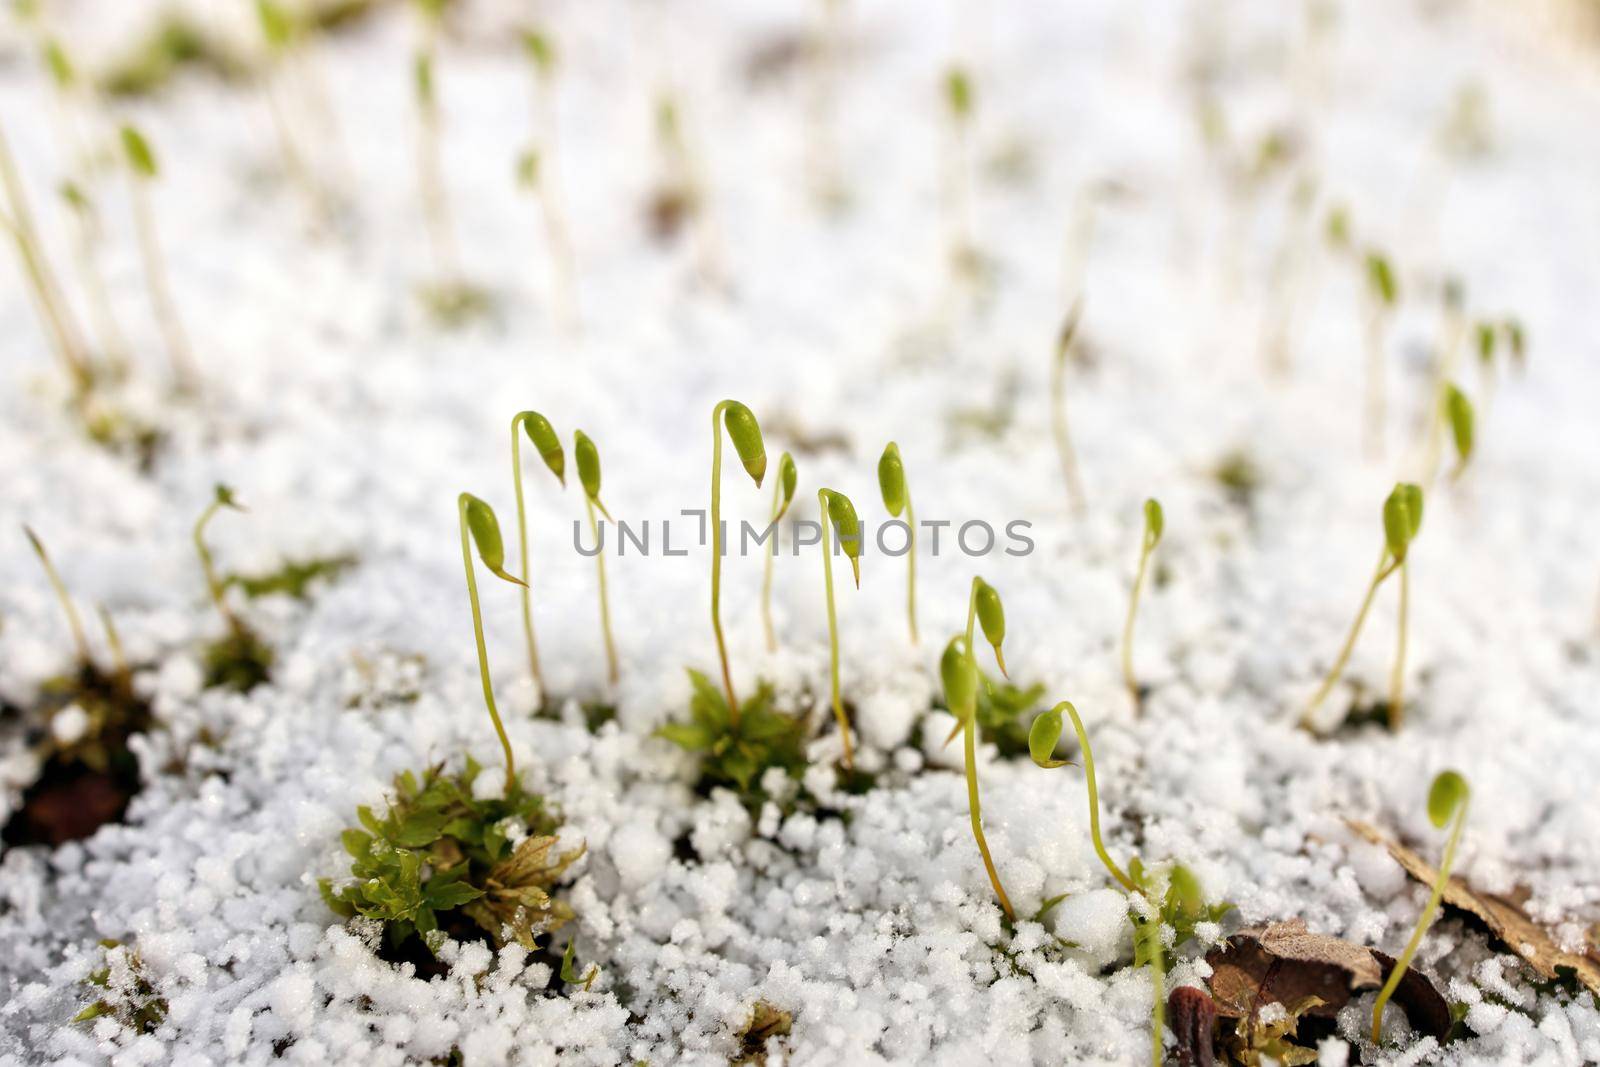 Young Sphagnum Moss Shoots Sprout Through a Fresh Layer of Graupel Snow in Spring by markvandam